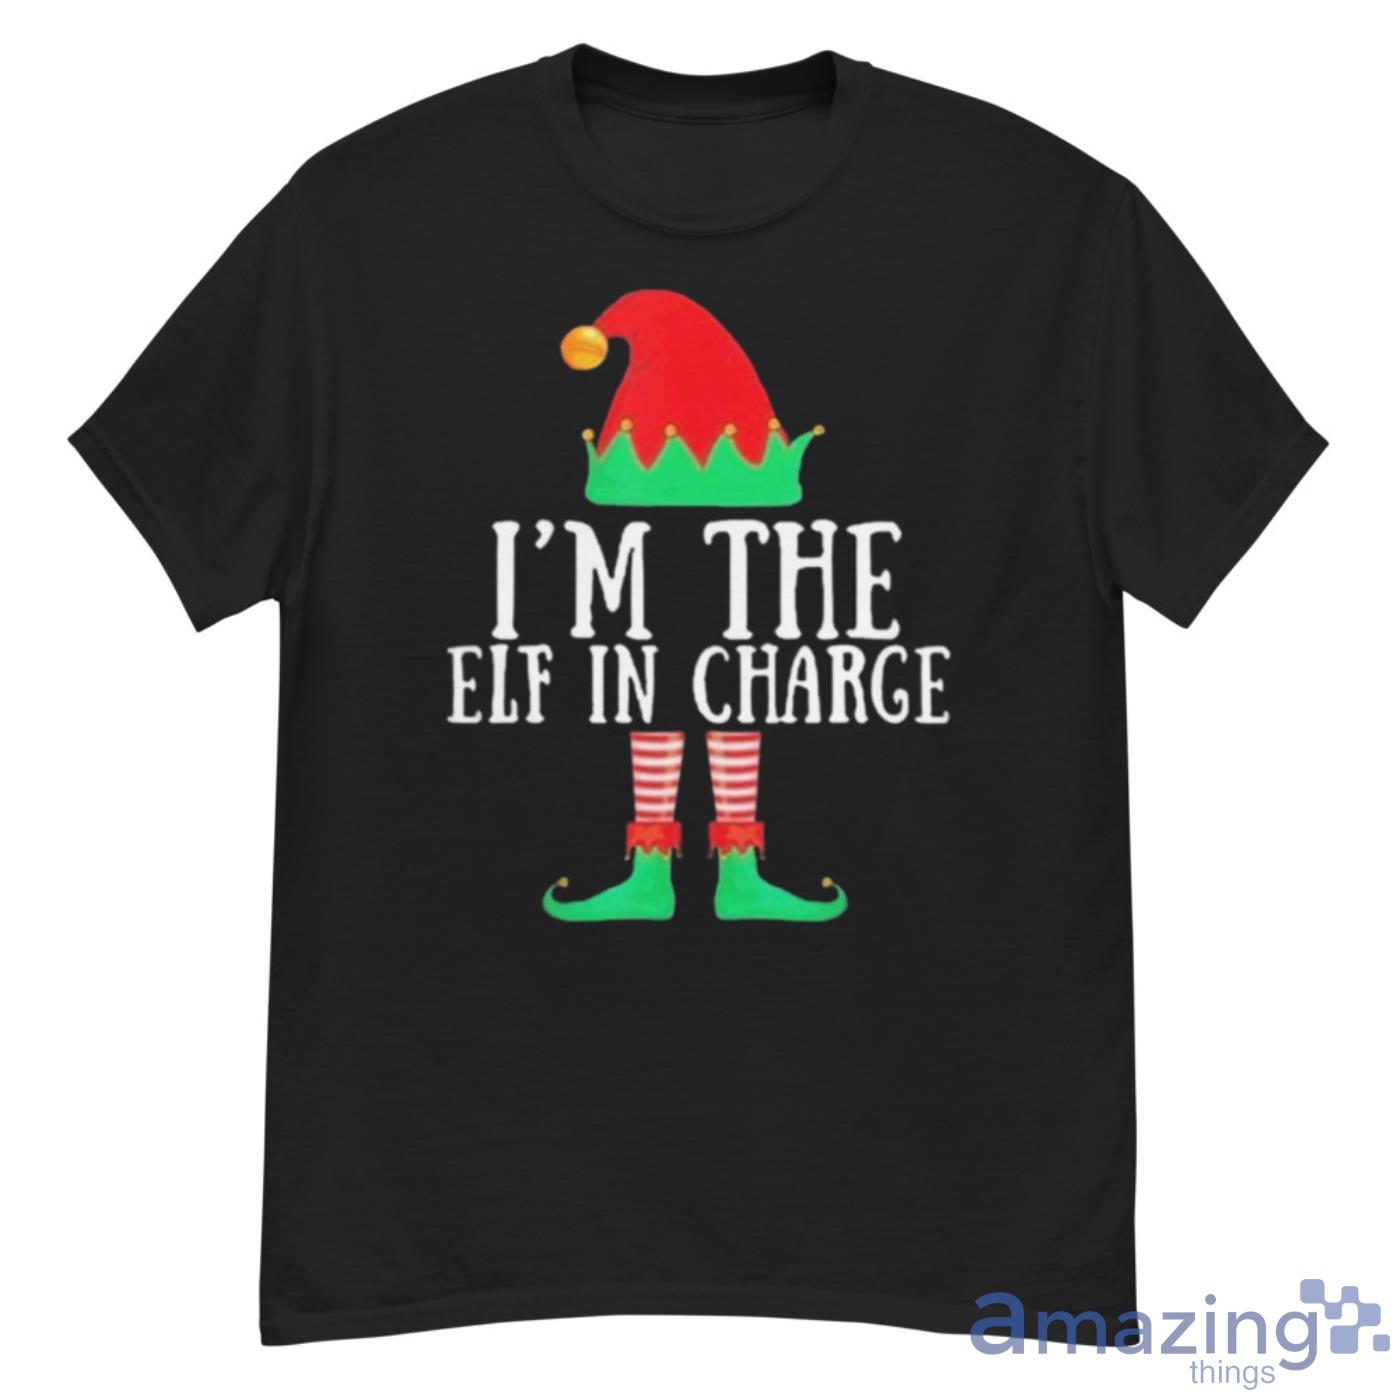 I’m The Elf In Charge Christmas Shirt - G500 Men’s Classic T-Shirt